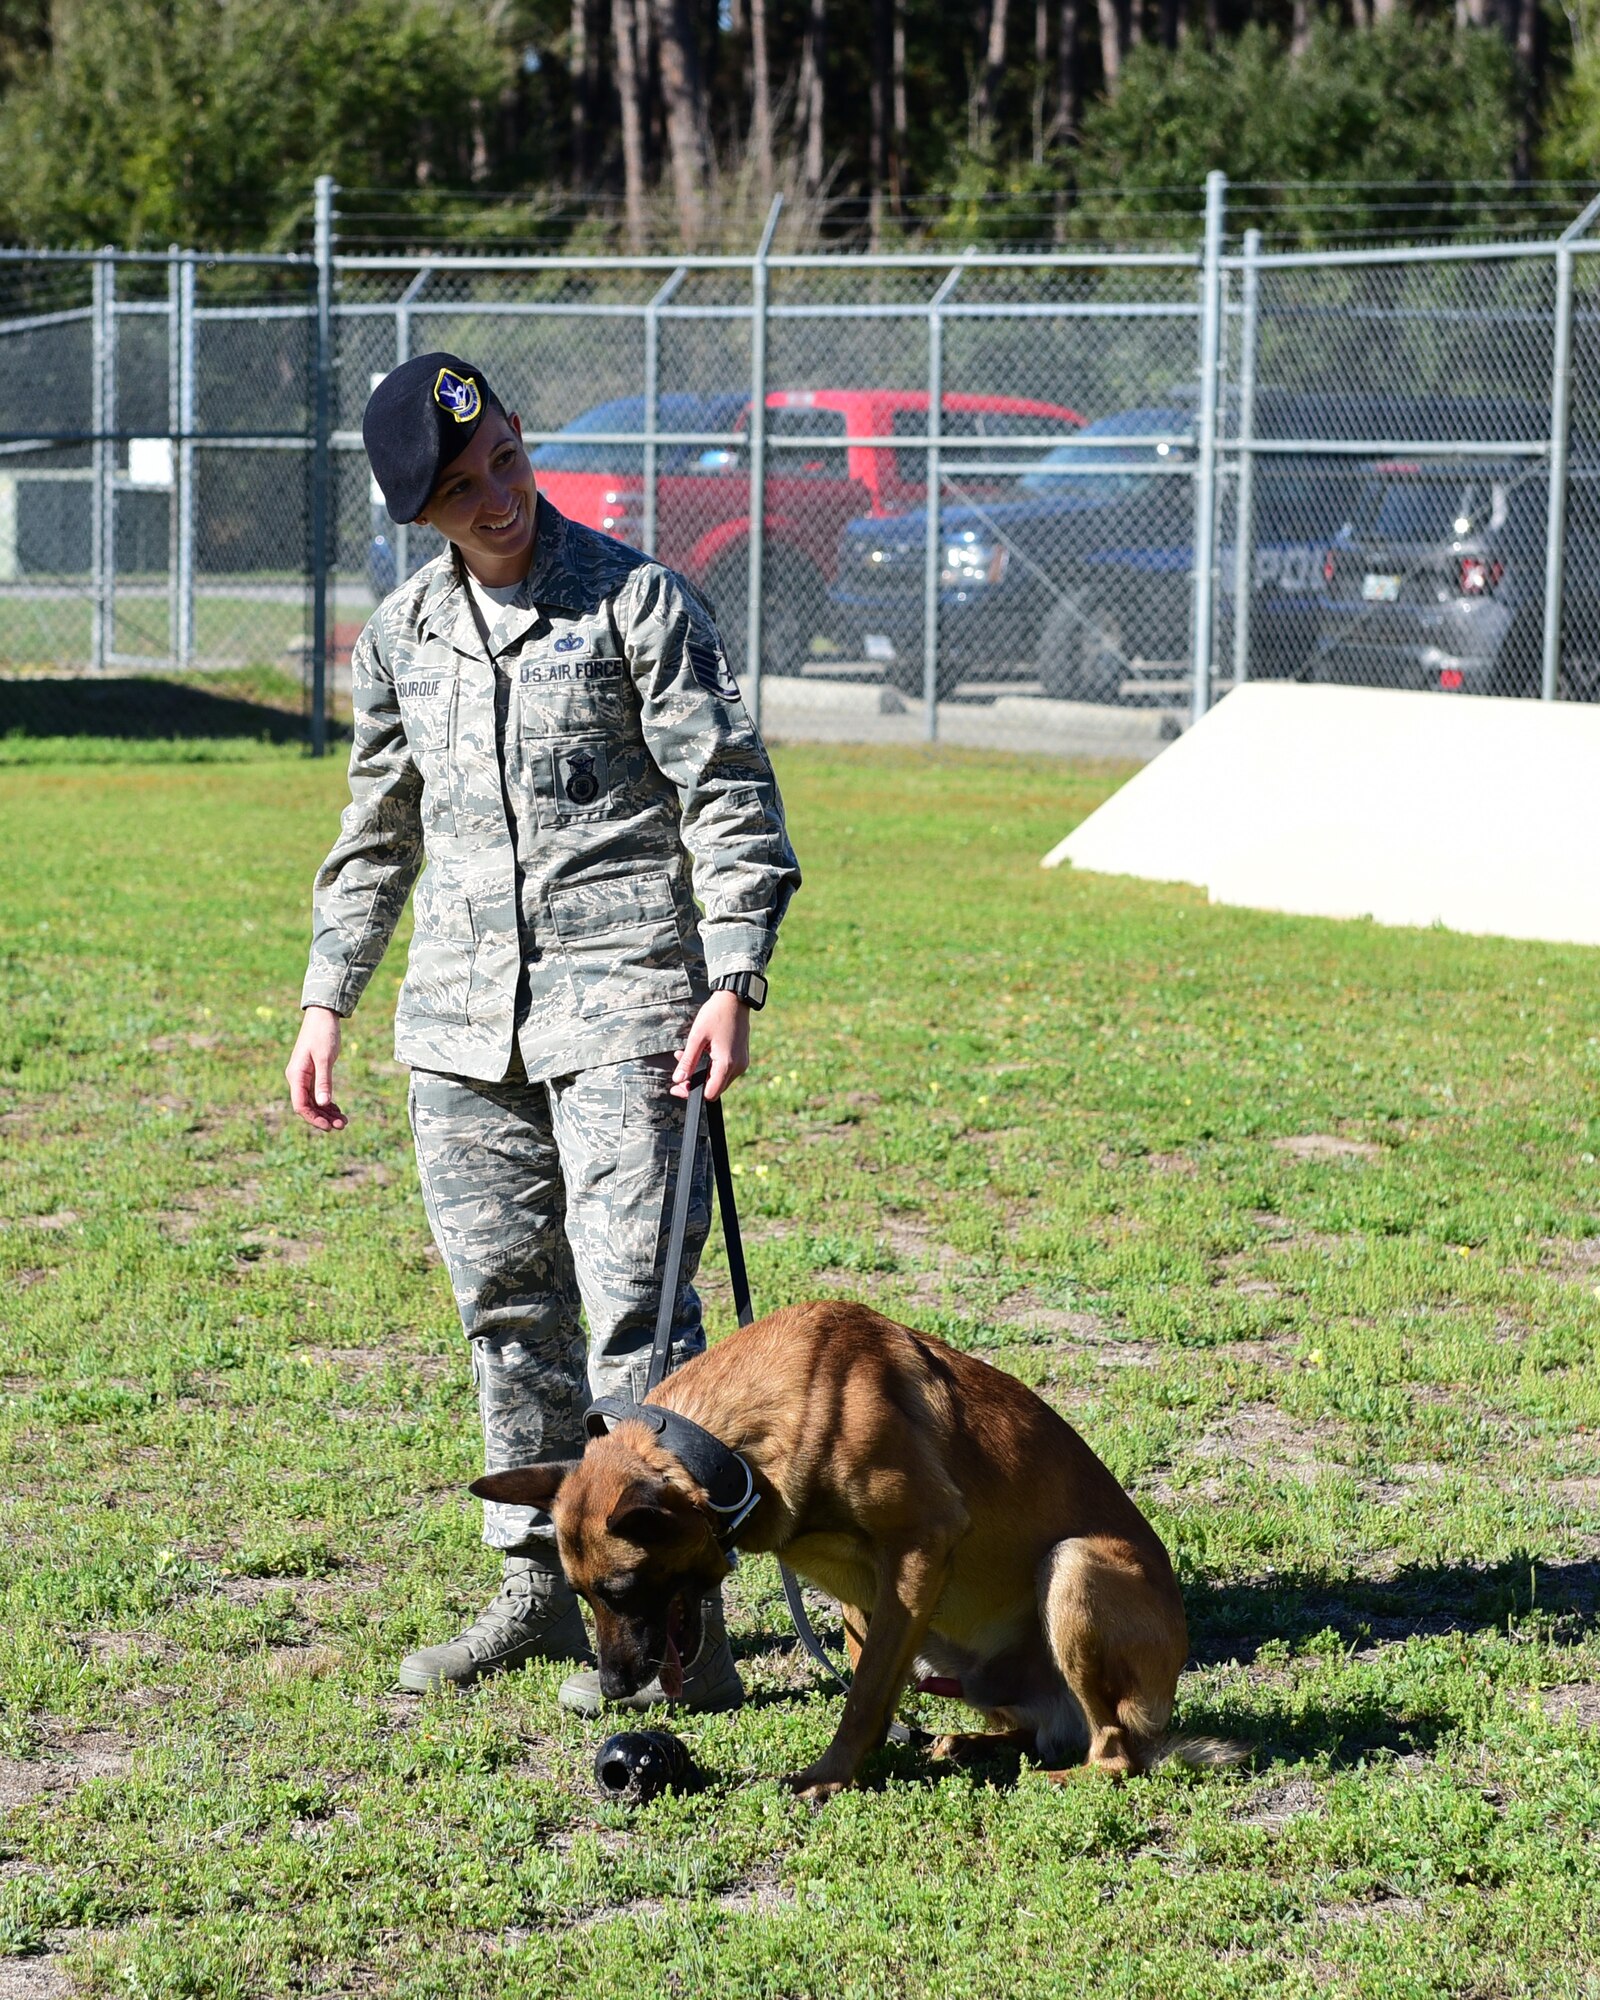 U.S. Air Force Staff Sgt. Caitlin Bourque, 325th Security Forces Squadron military working dog handler, and her partner, Atila, during an interview at Tyndall Air Force Base, Fla. March 2, 2018. A military working dog handler is responsible for the care and training of his or her service dog, which contributes to combat operations abroad and installation security at home by providing target odor detection for both explosives and drugs. (U.S. Air Force photo by Senior Airman Cody R. Miller/Released)